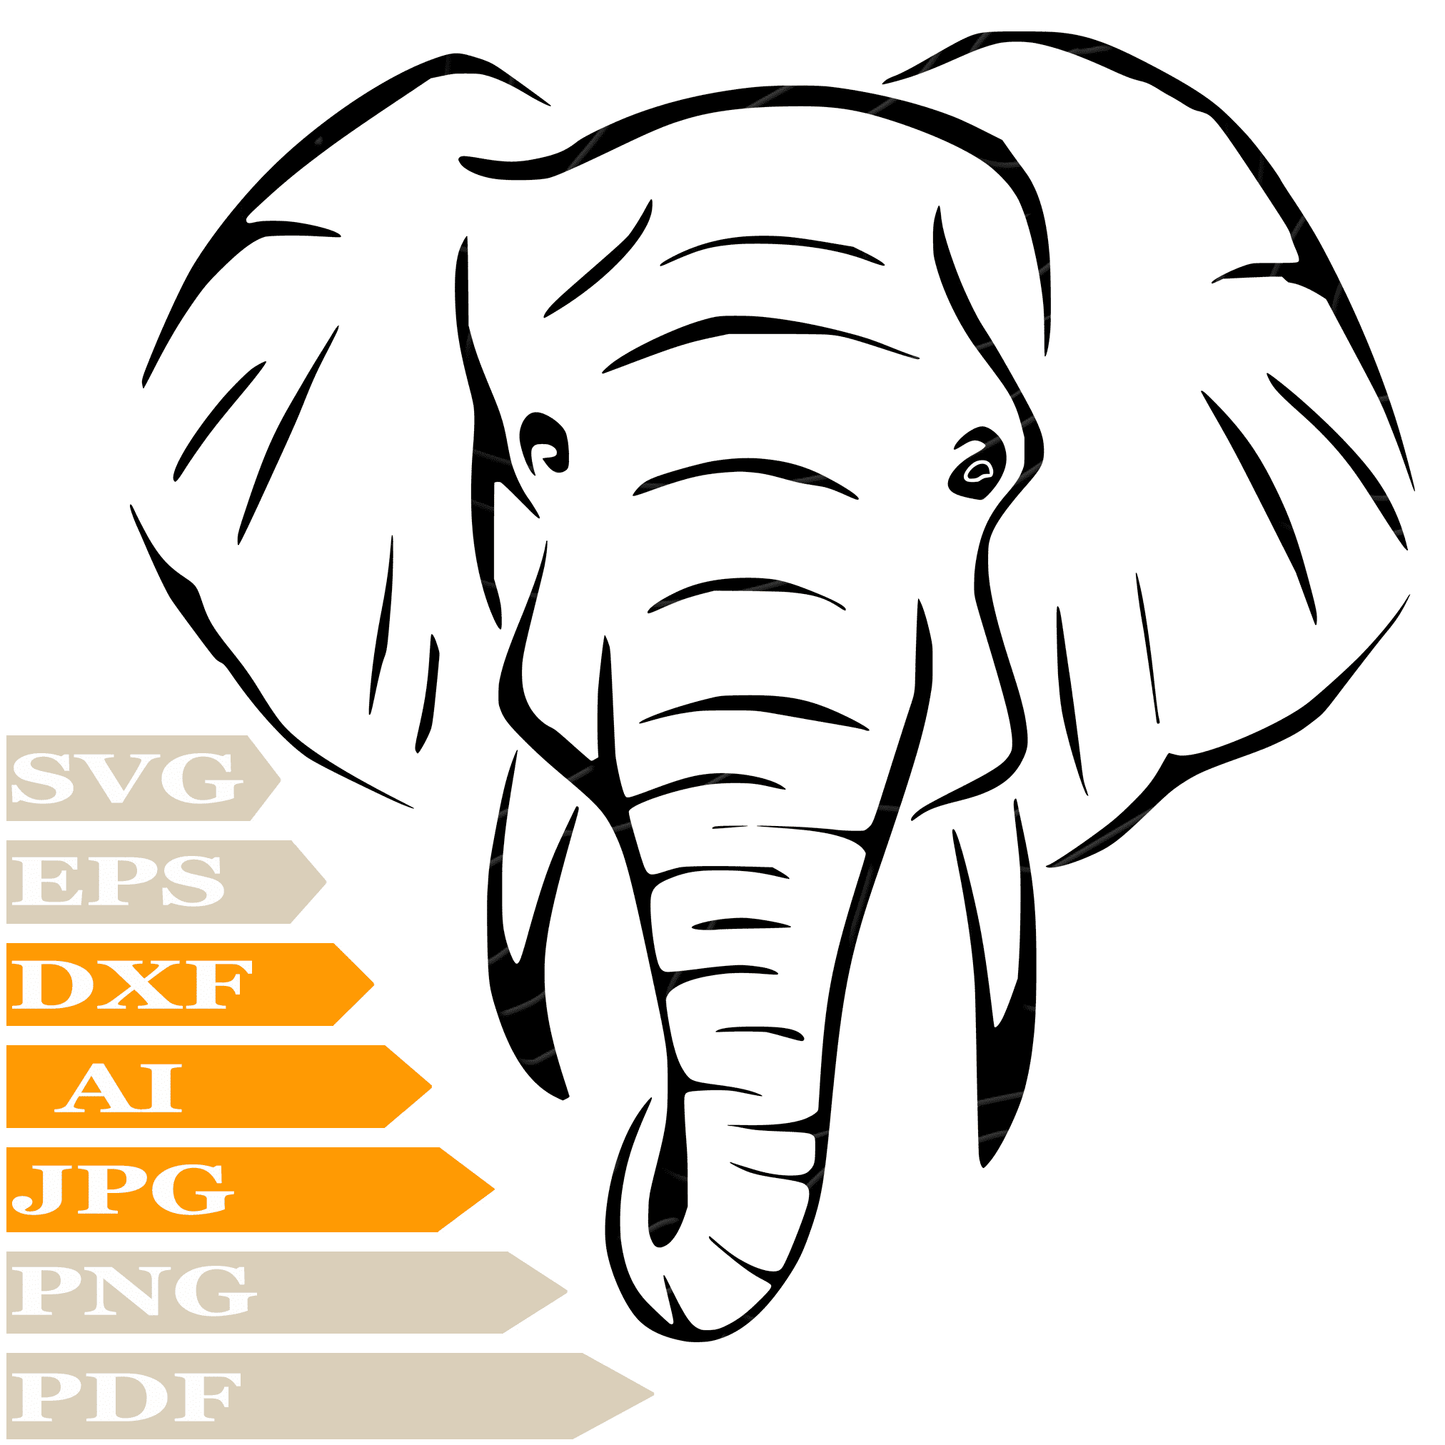 Elephant SVG File-Elephant Head Drawing SVG-Elephant Wild Animals Vector Clip Art-Cut Files-Illustration-PNG-Circuit-Digital Files-For Shirts-Silhouette